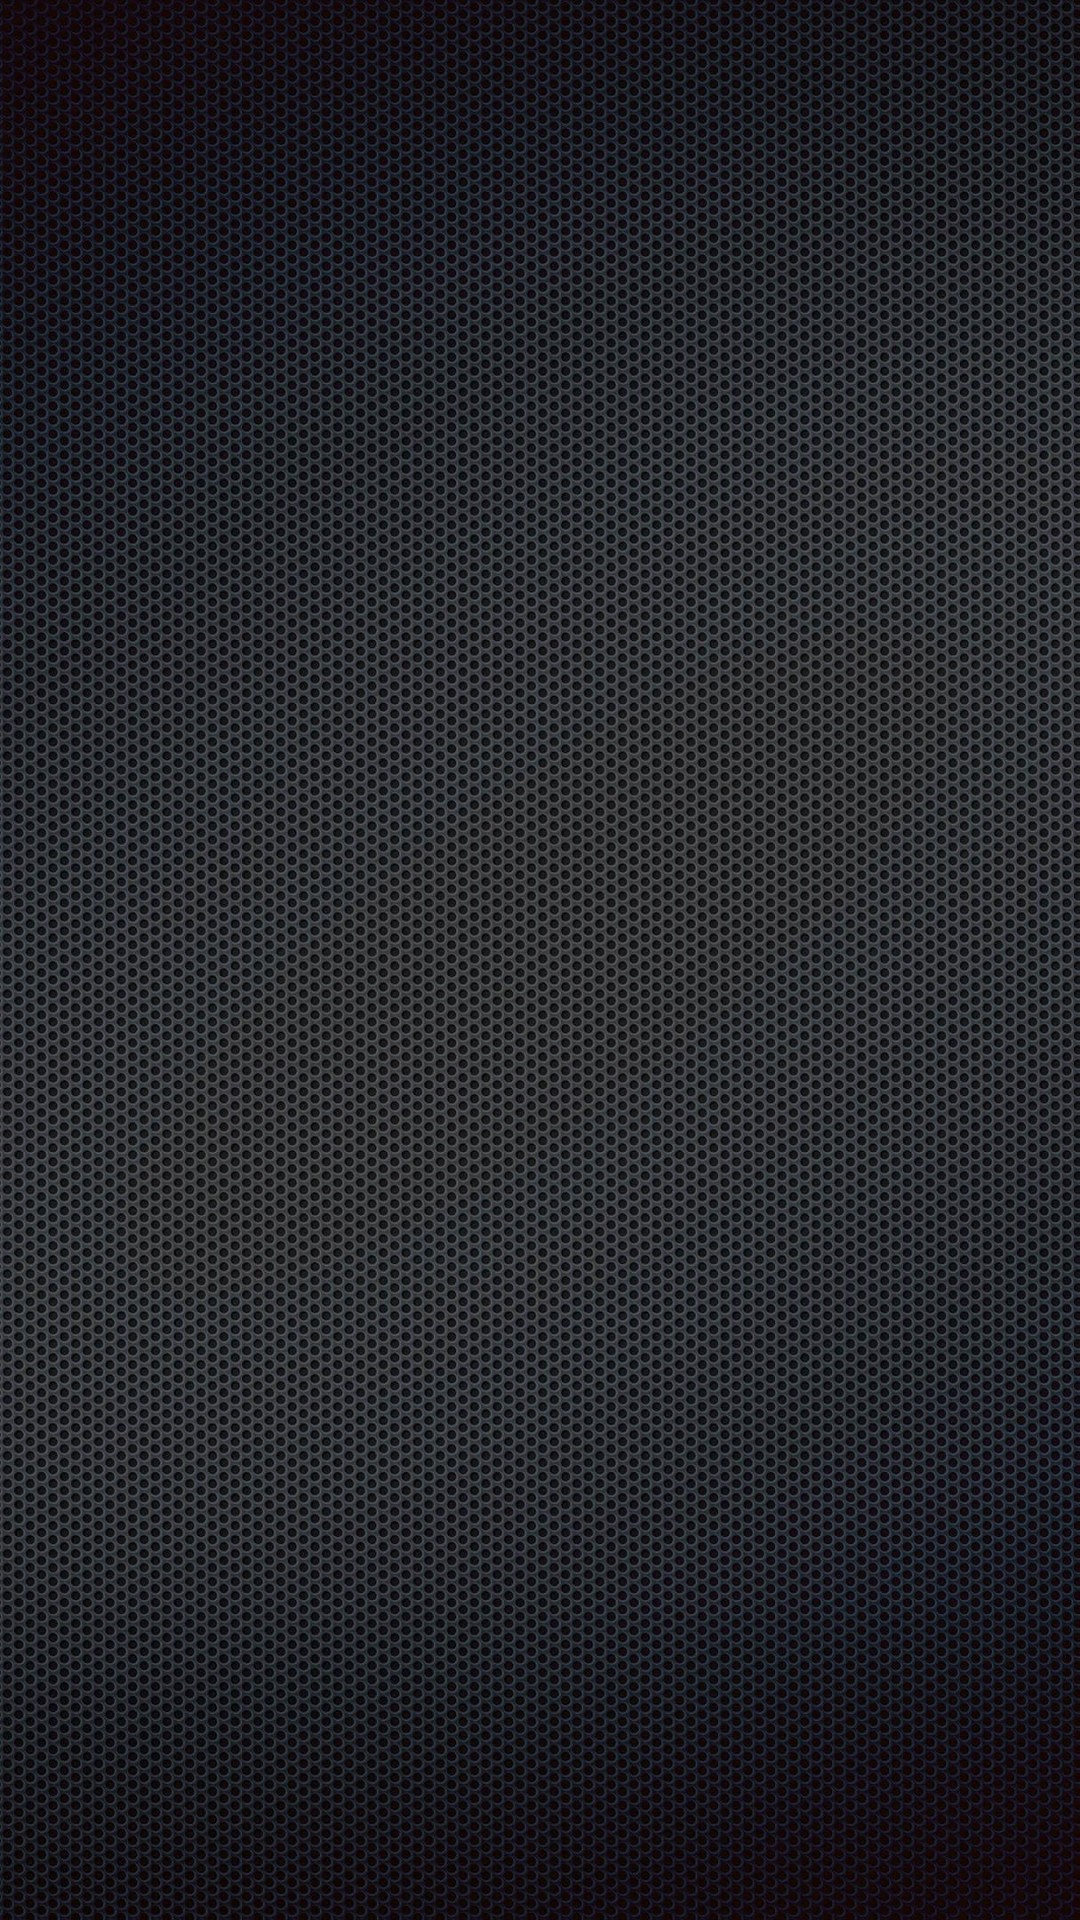 Black Grill Texture Wallpaper for SONY Xperia Z3